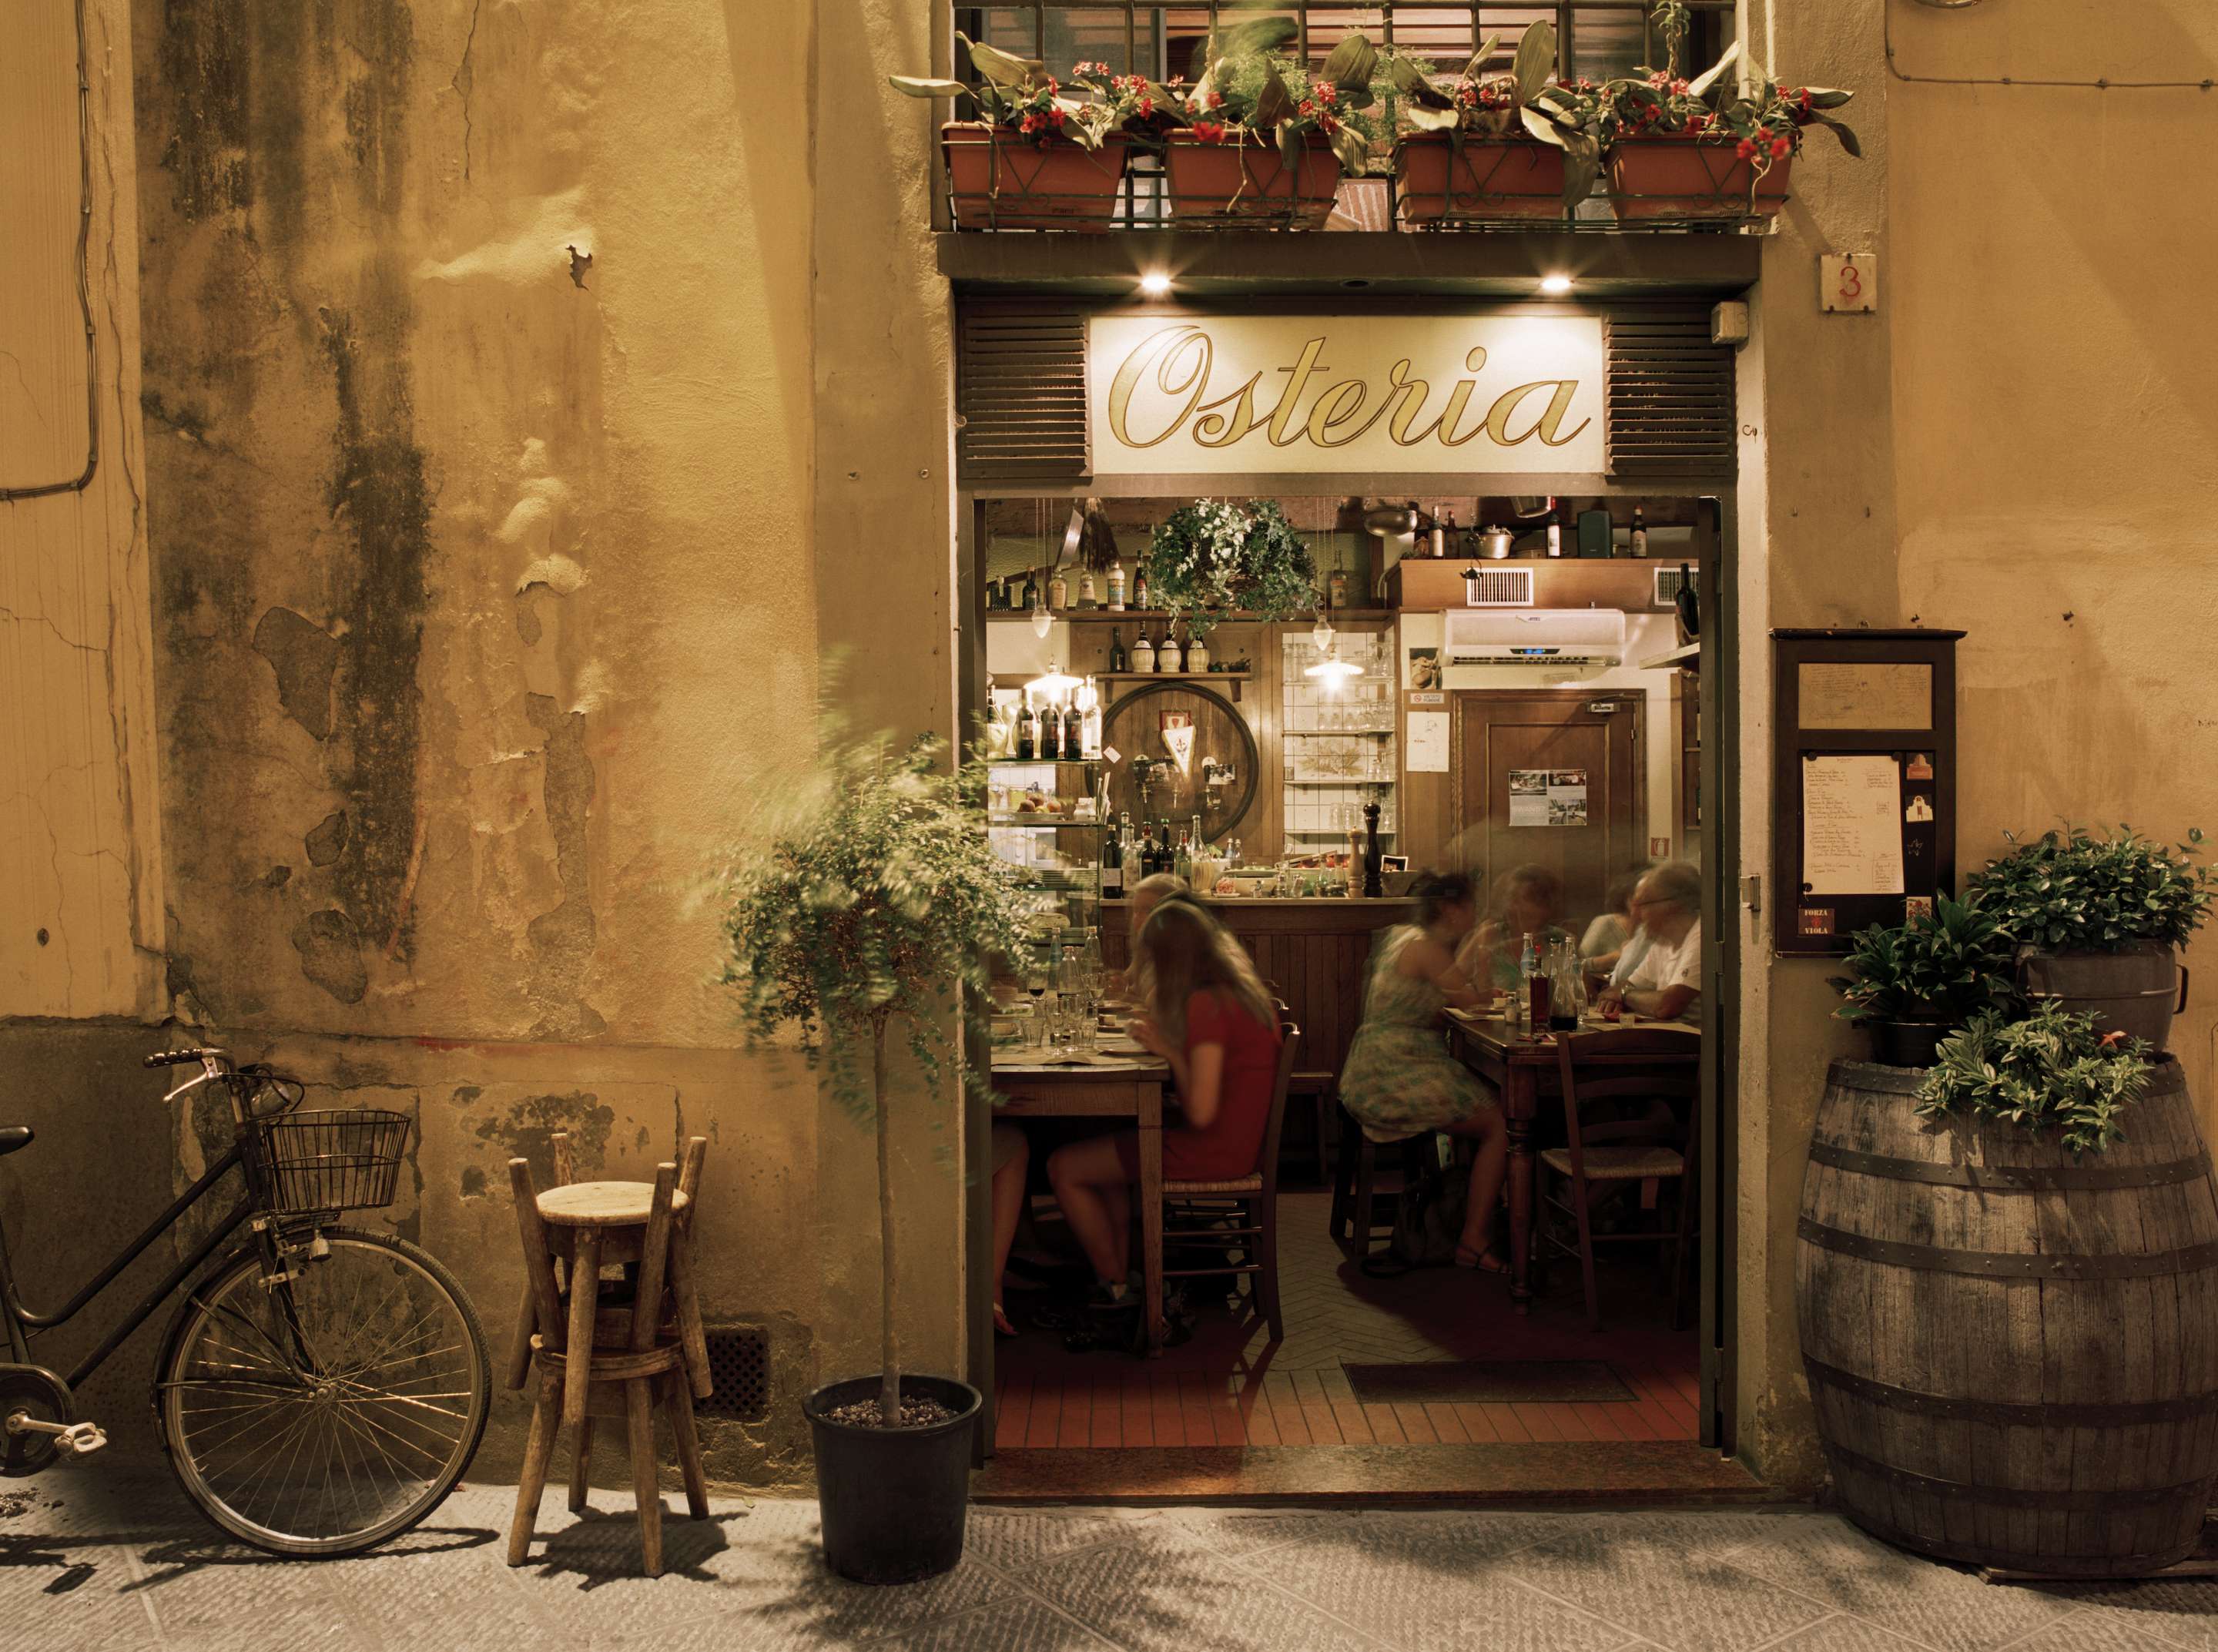 A restaurant in Florence